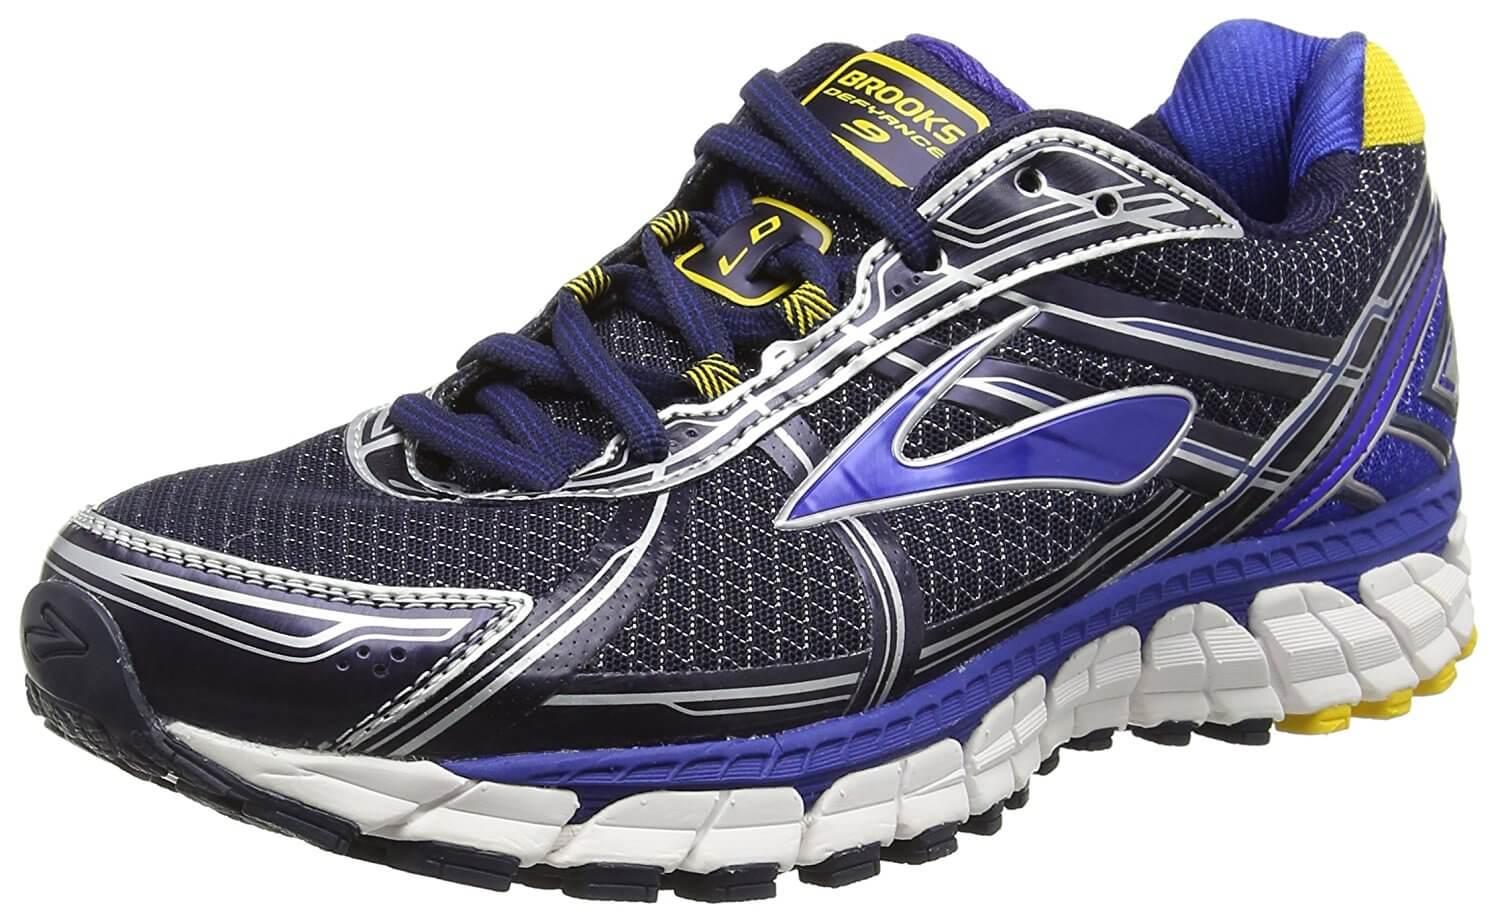 Brooks Defyance 9 is a stable shoe for heavier runners and everyday runners.